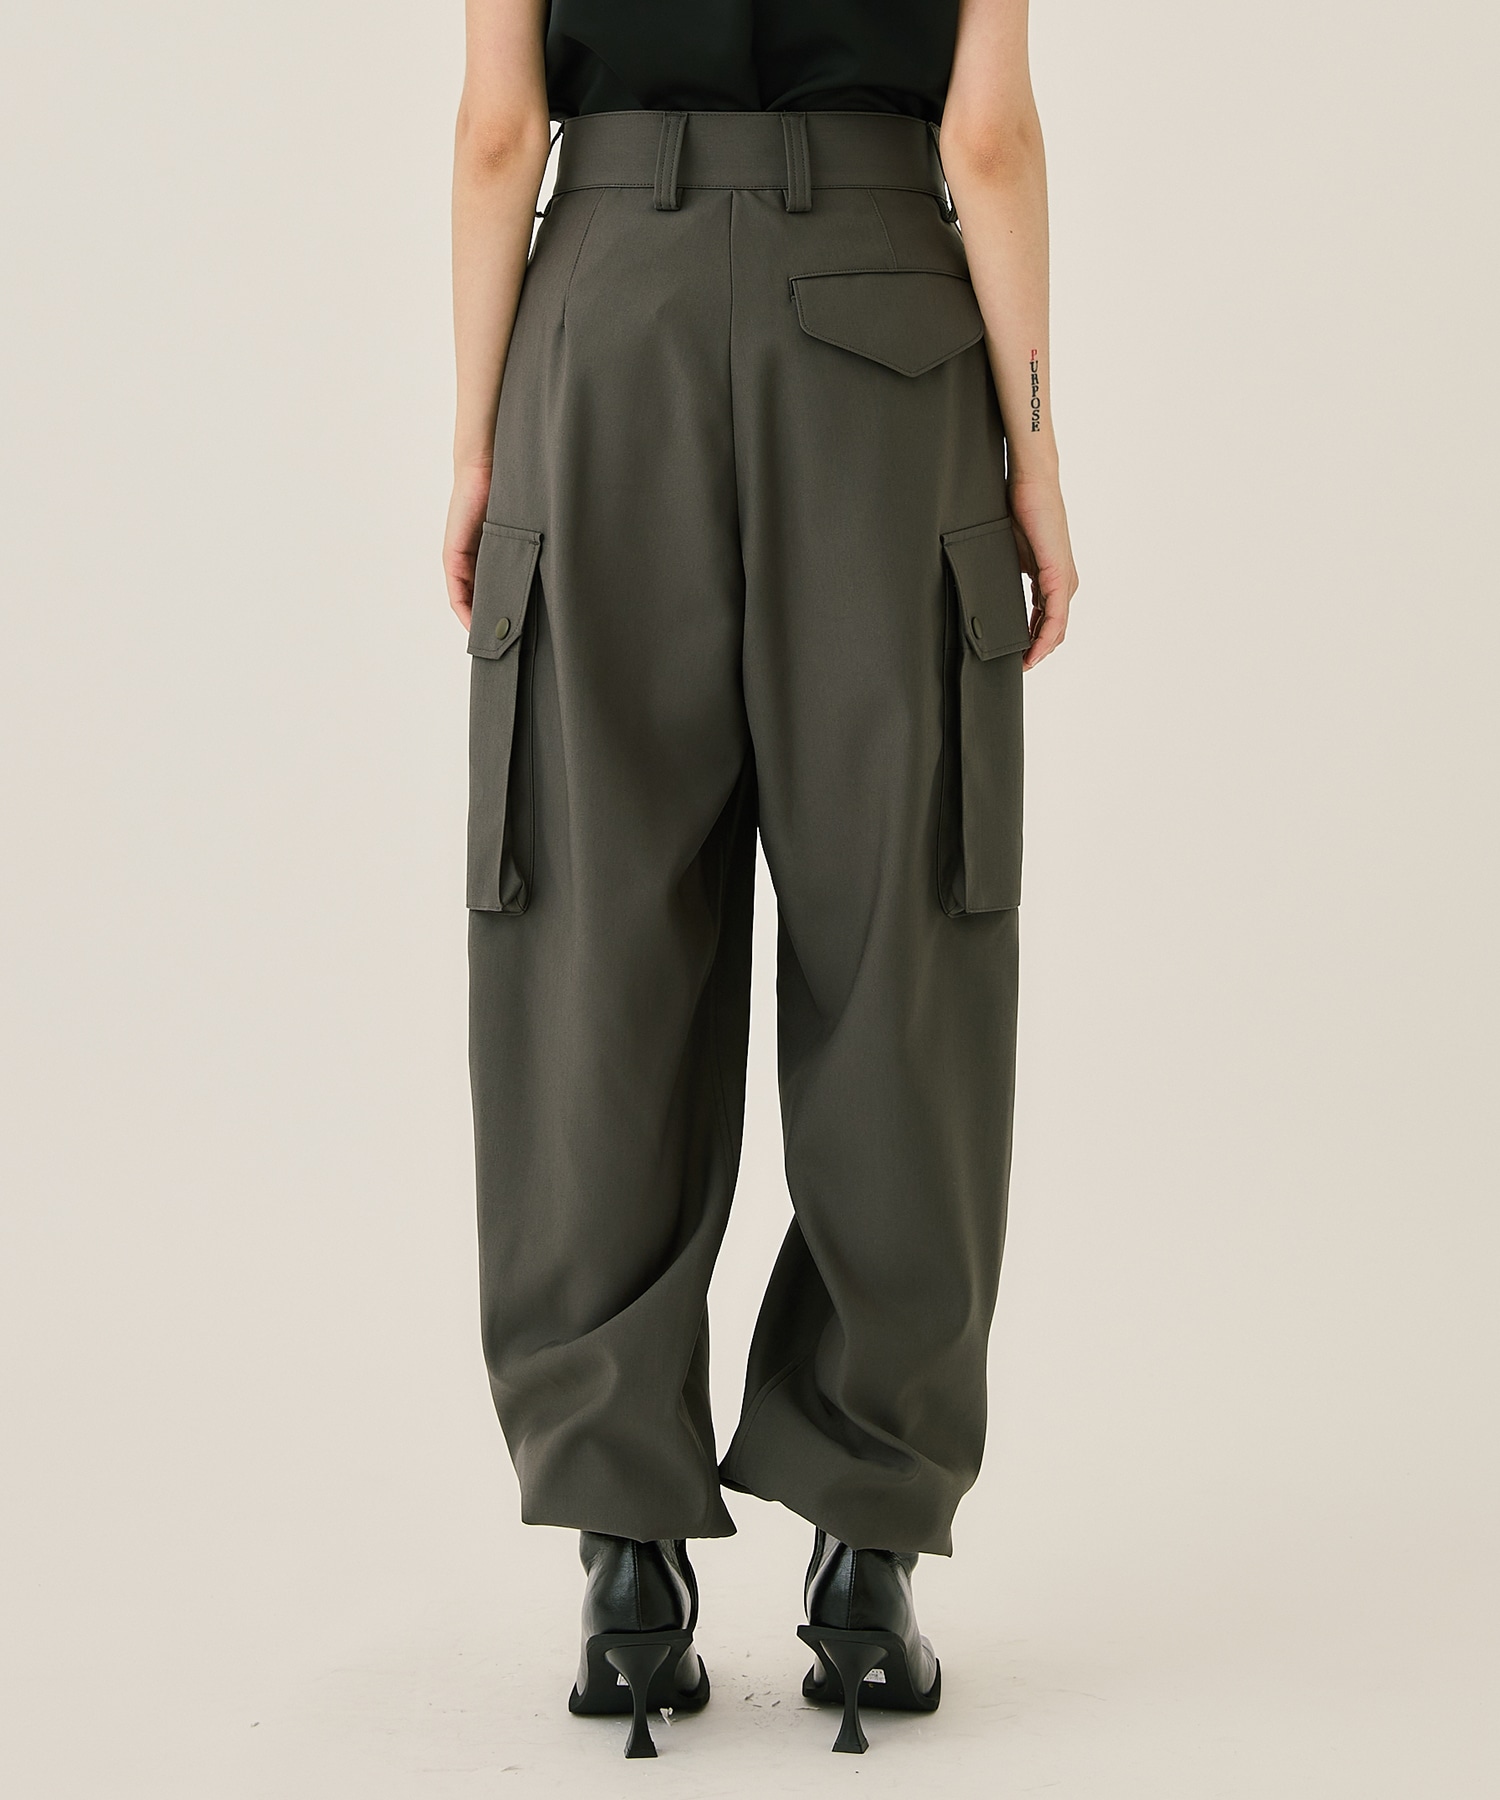 THE RERACS FRENCH ARMY F2 CARGO PANTS